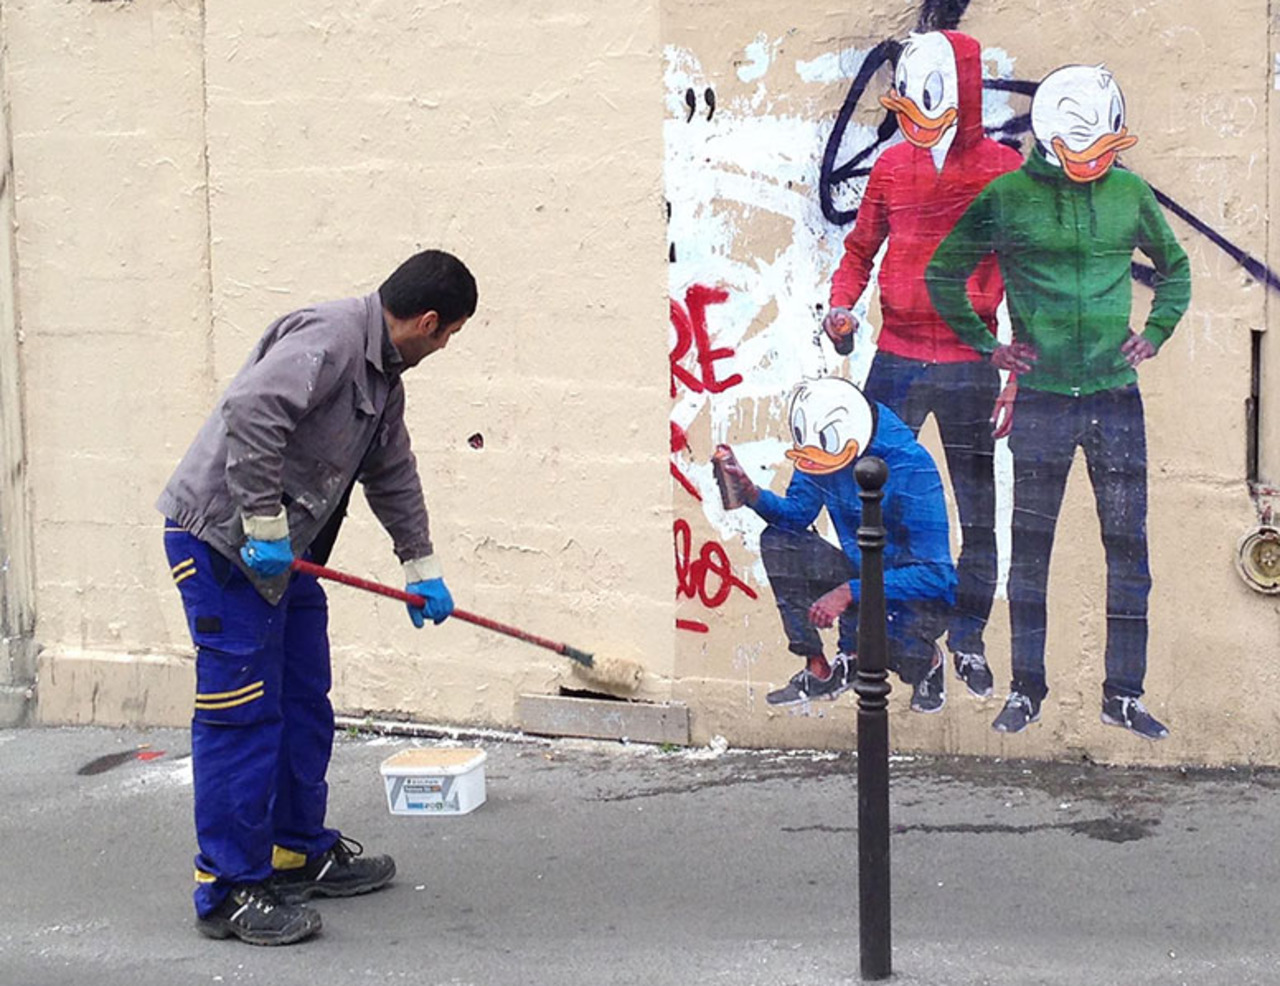 pan_tabetai: RT _inkster_: This is too #funny! #Graffiti removal guy gets turned into #streetart in #Paris … http://t.co/dXZxoqziwI